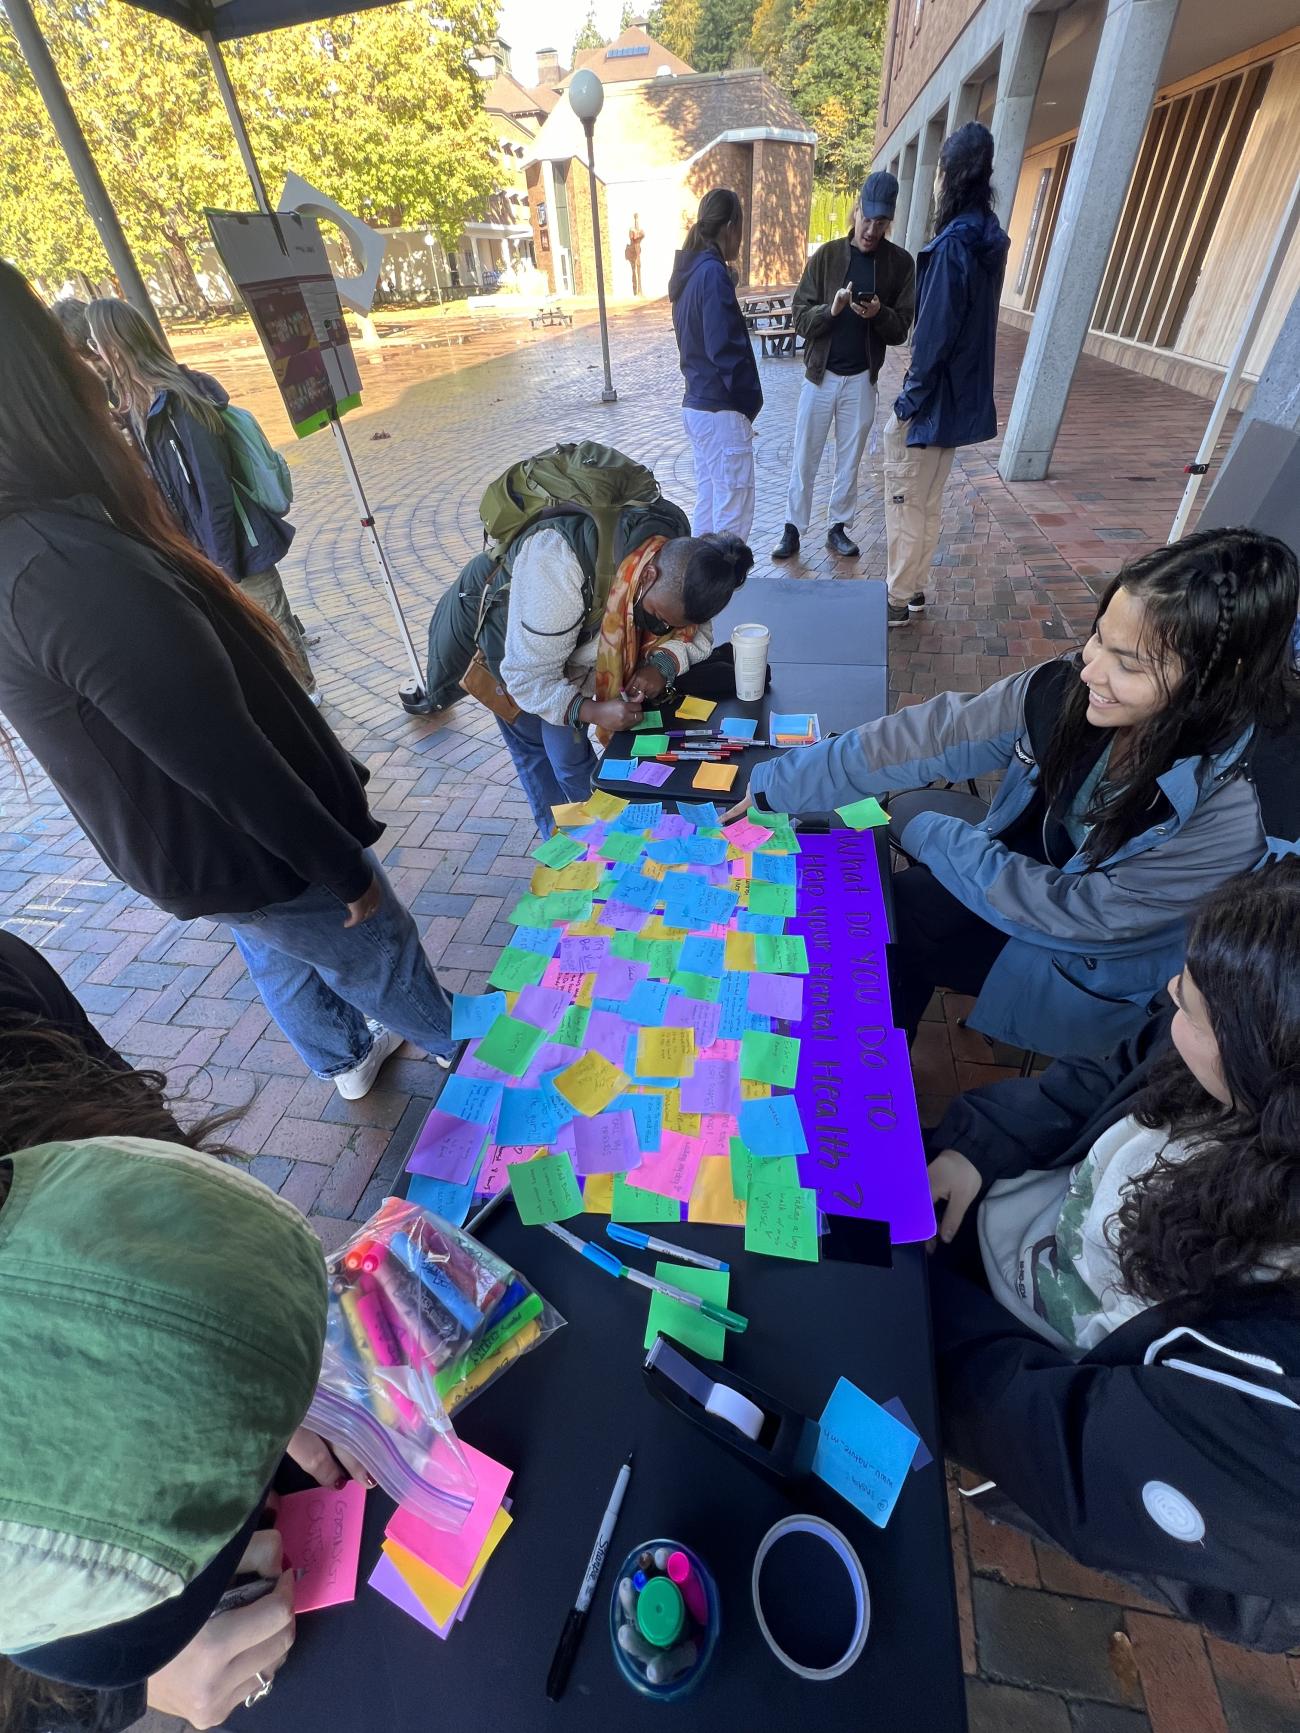 multiple people standing and siting around table, mostly covered in various colored sticky notes that the people are writing on 